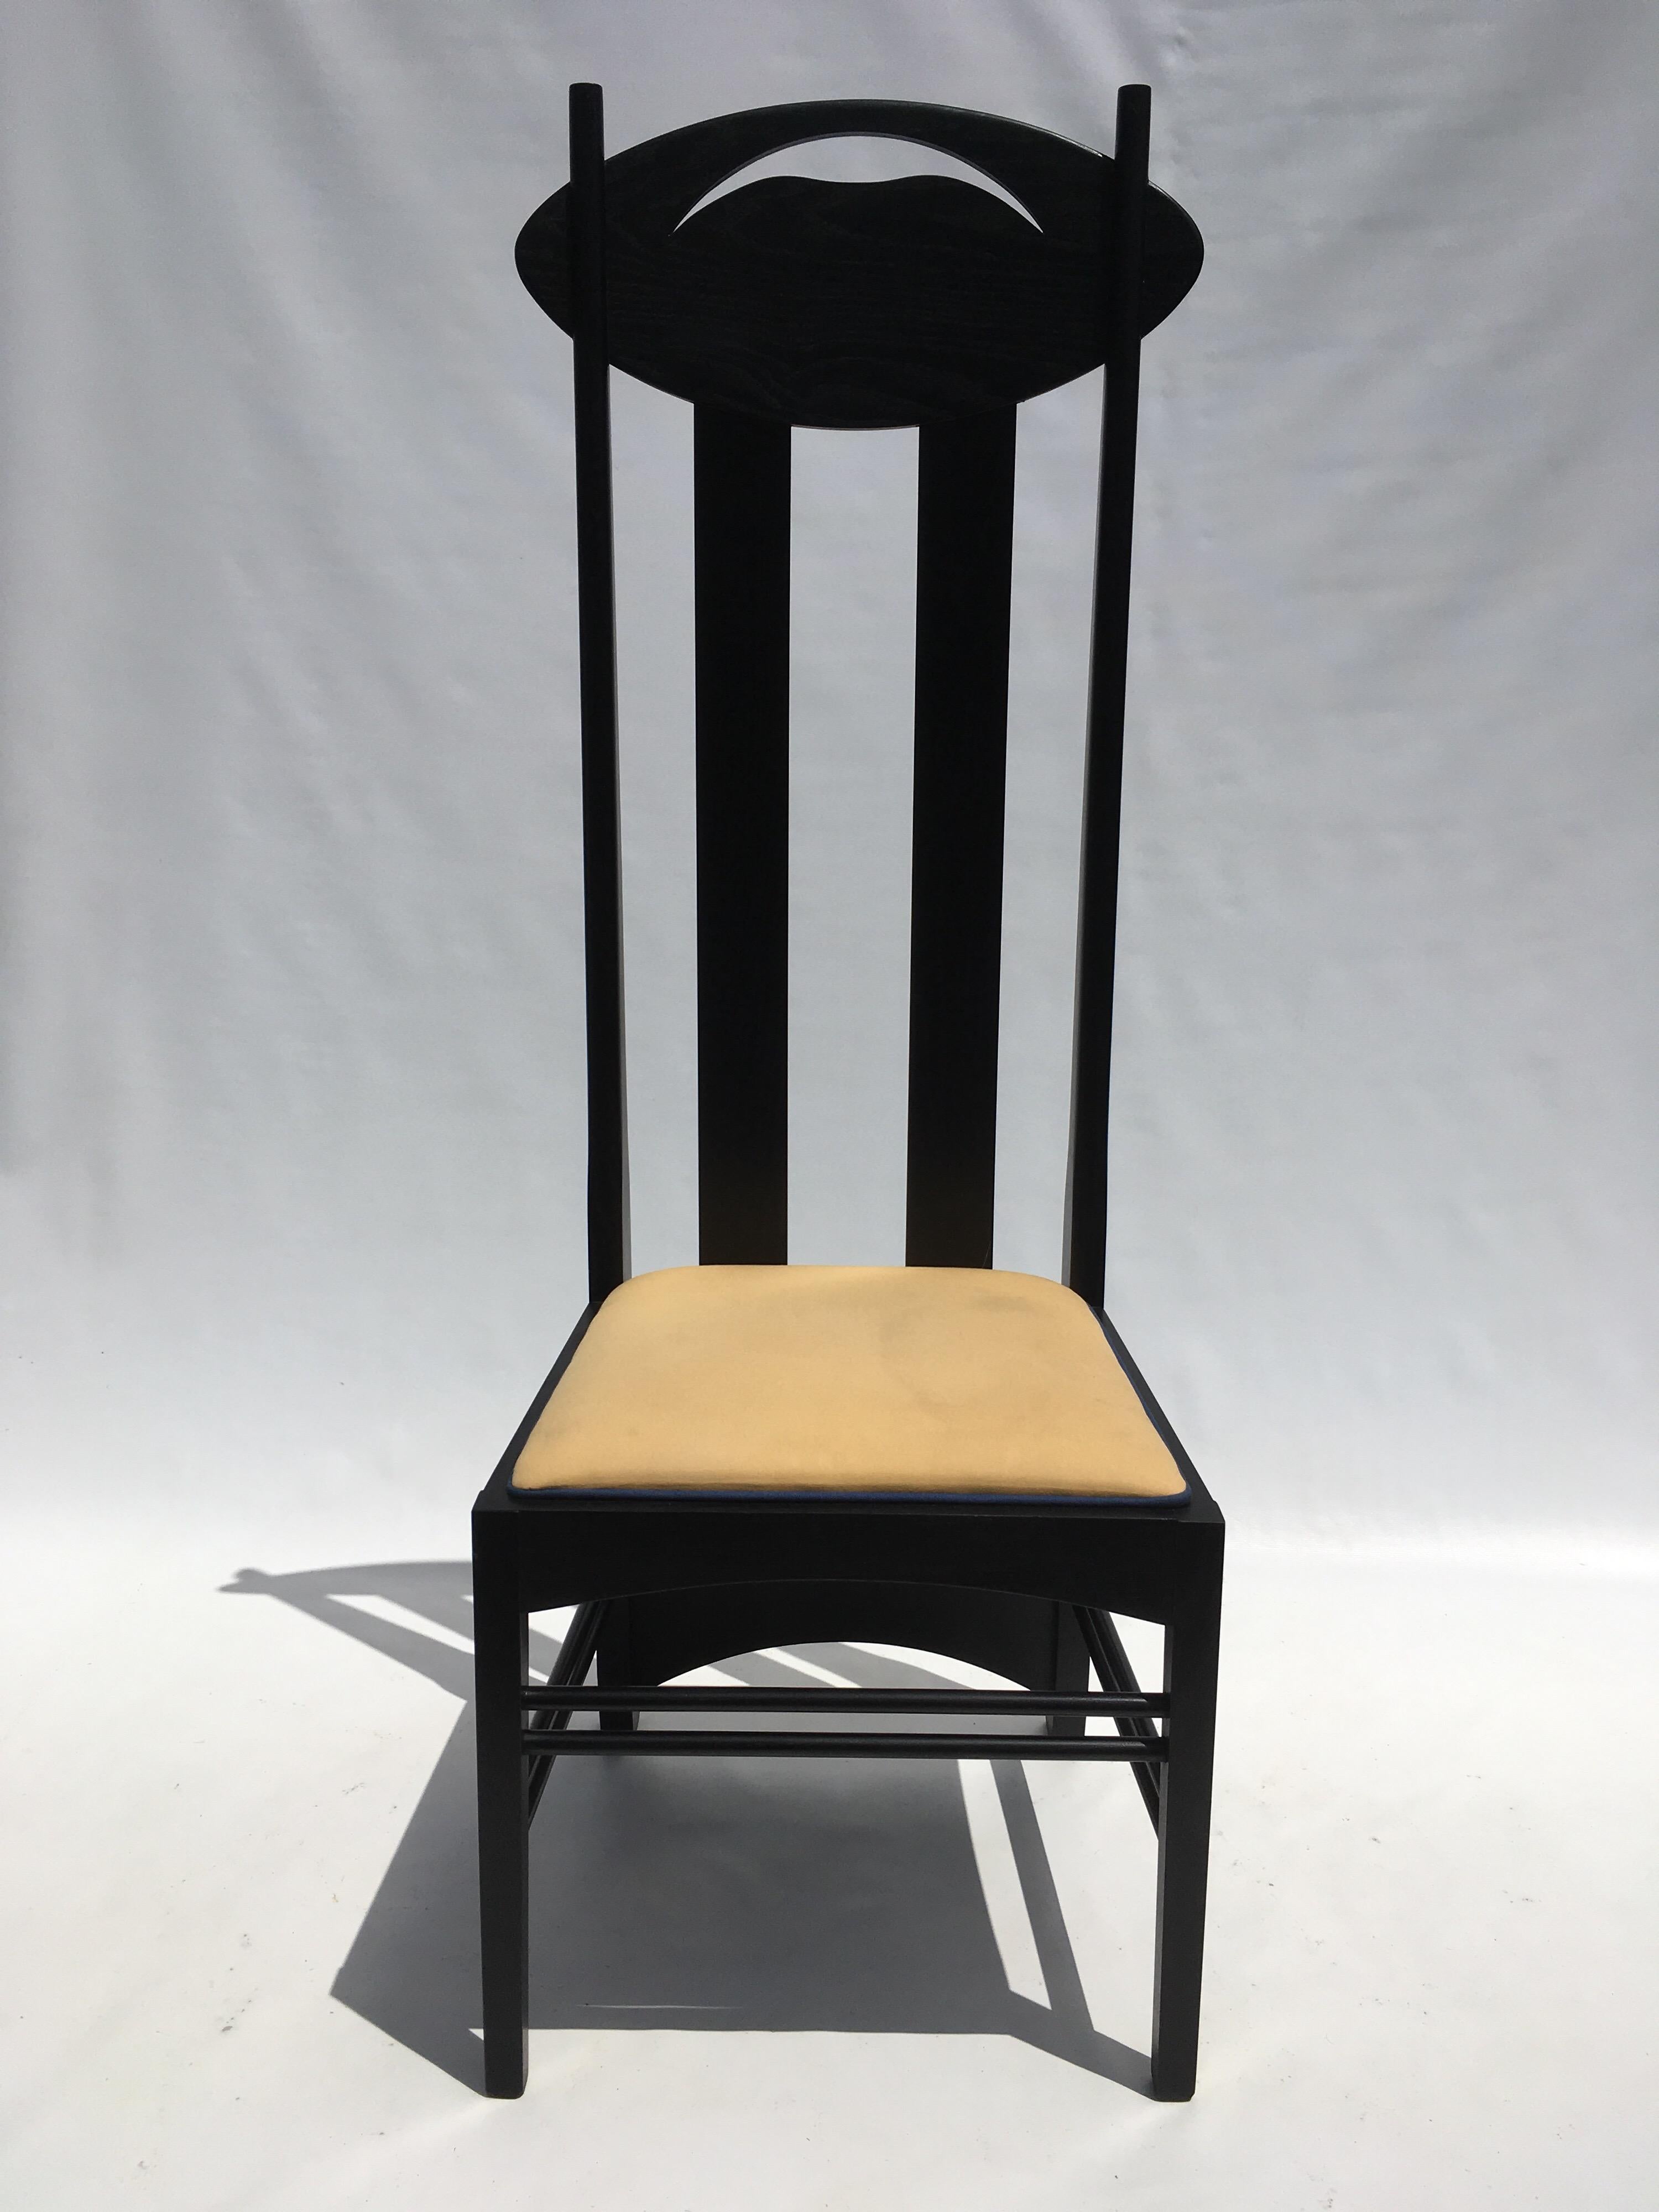 Fabric Two Charles Rennie Mackintosh Tall Back Chairs by Cassina